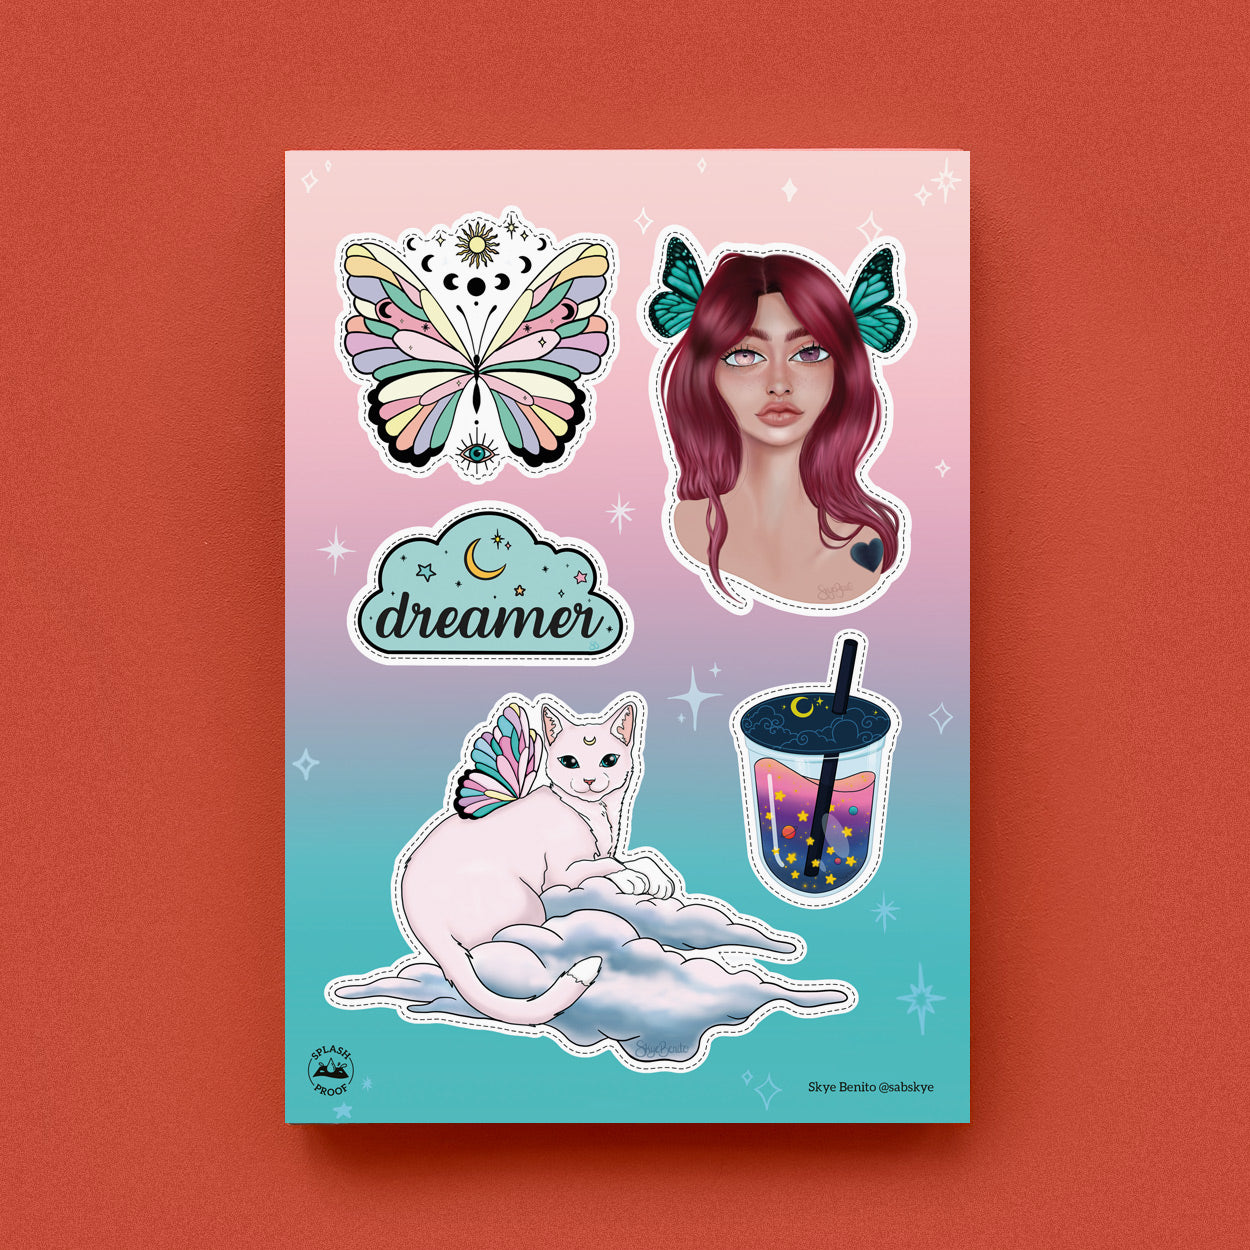 Gentle People Dumaguete City artist art craft book stickers sticker cute creative gift souvenir solution travel tourism Belfry tricycle Cil Flores sticker page journal journaling scrapbooking hobby art collector Dumaguete city exhibition 